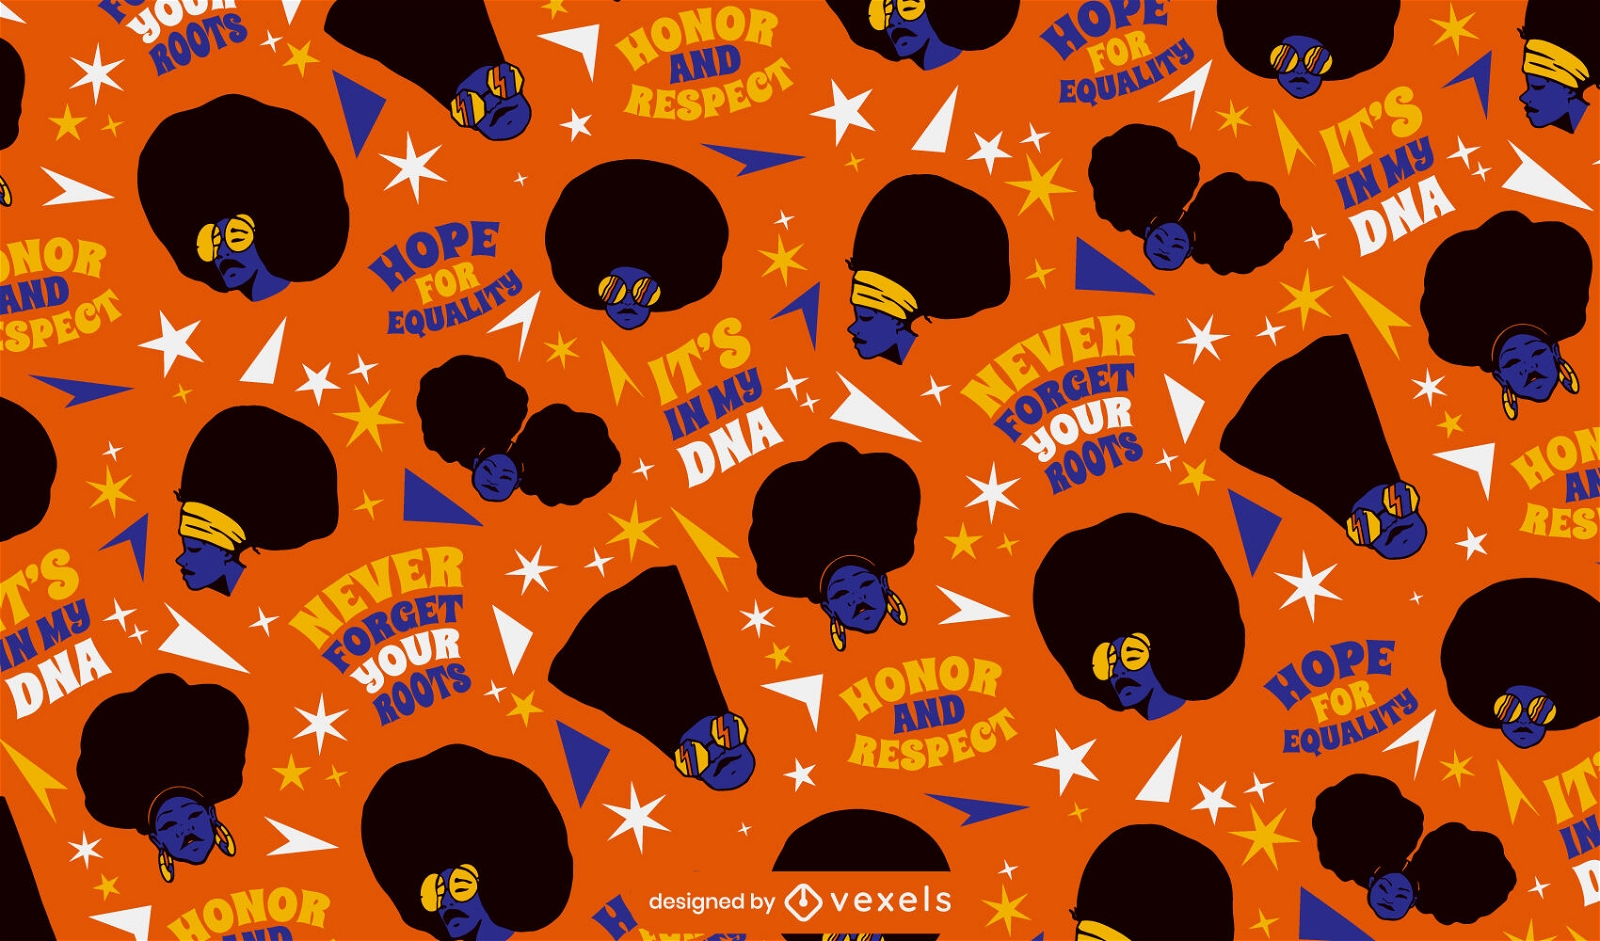 Black History Month afro hair pattern design